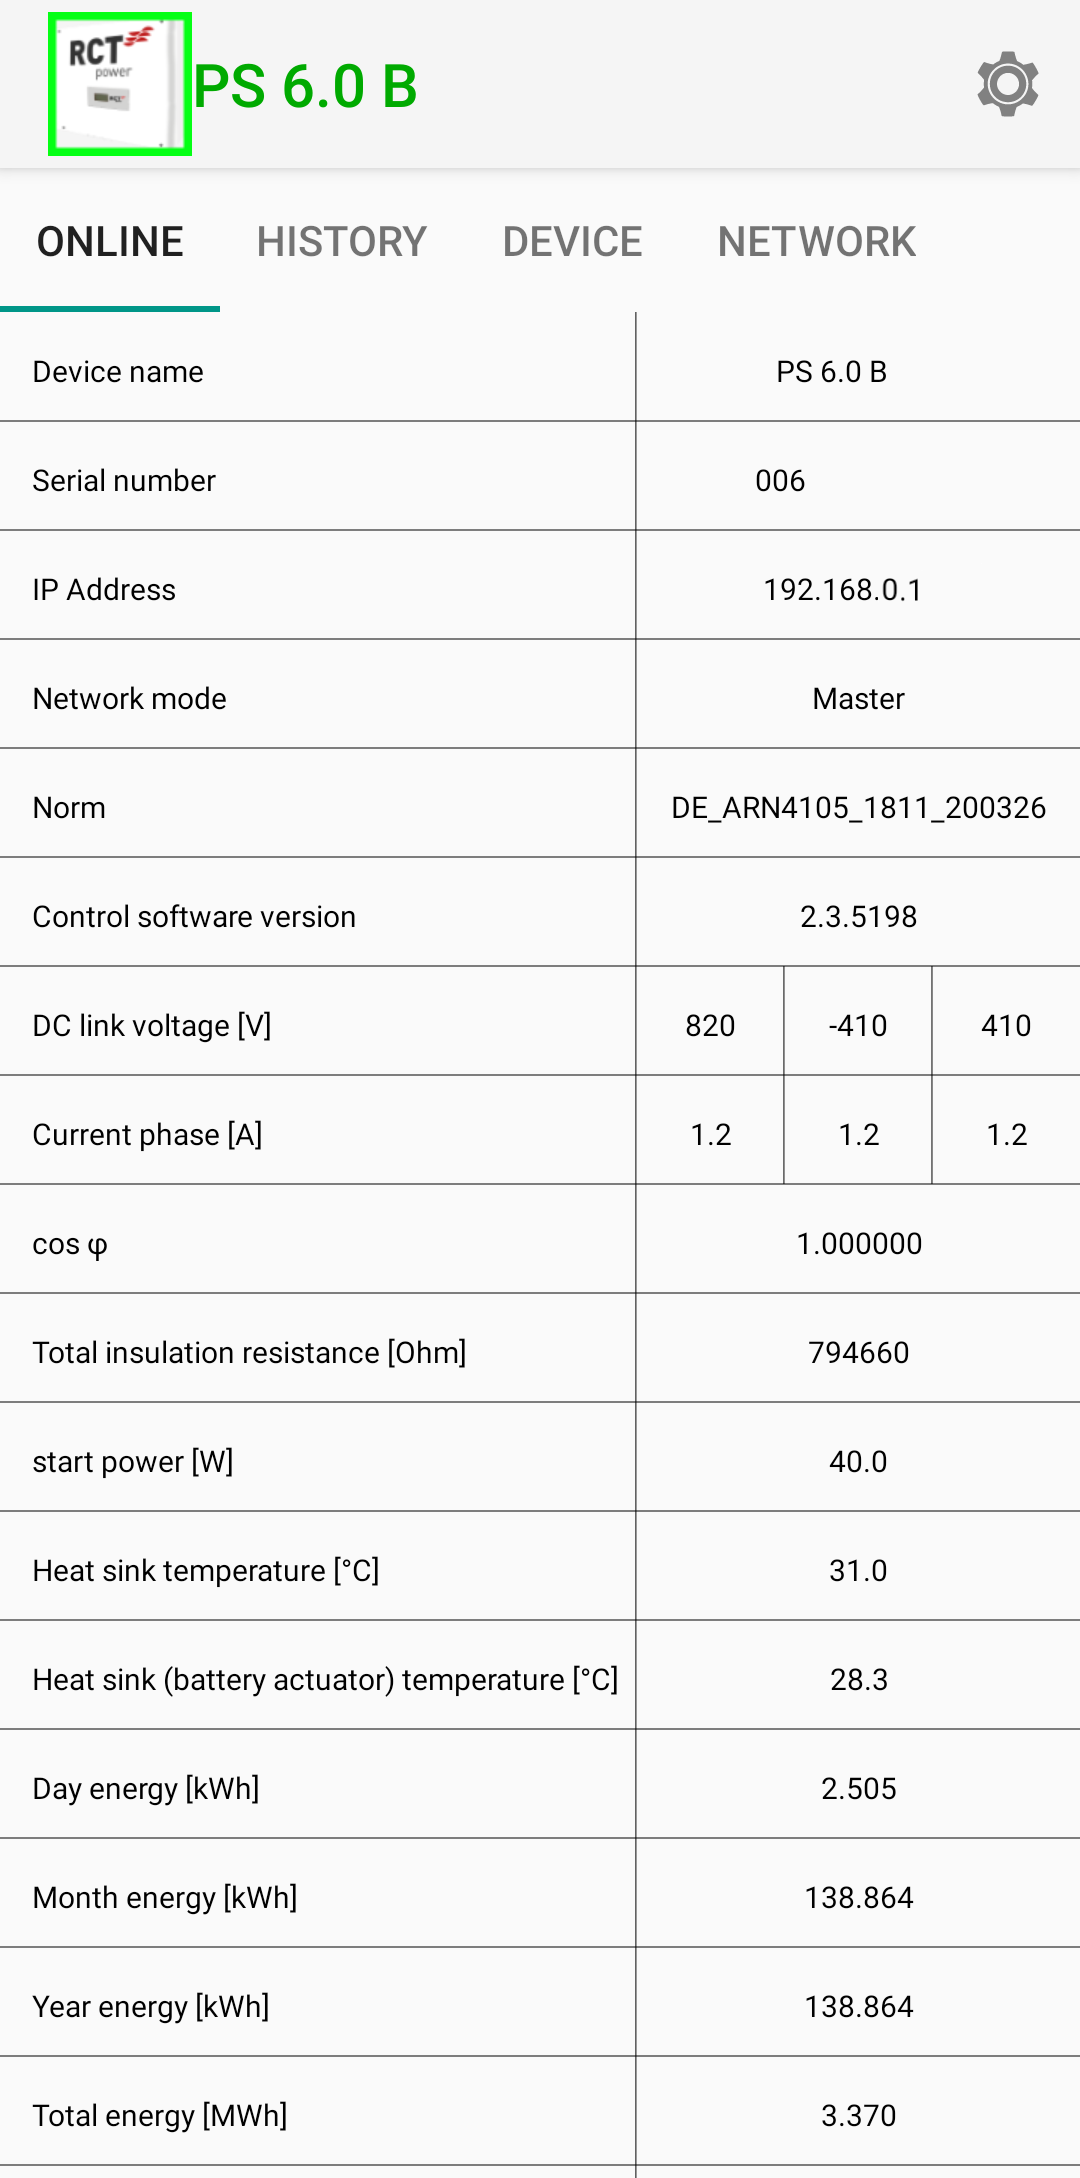 RCT Power App (Android) view of the inverter. The tabular view shows a set of values that are explained in the table following this image.